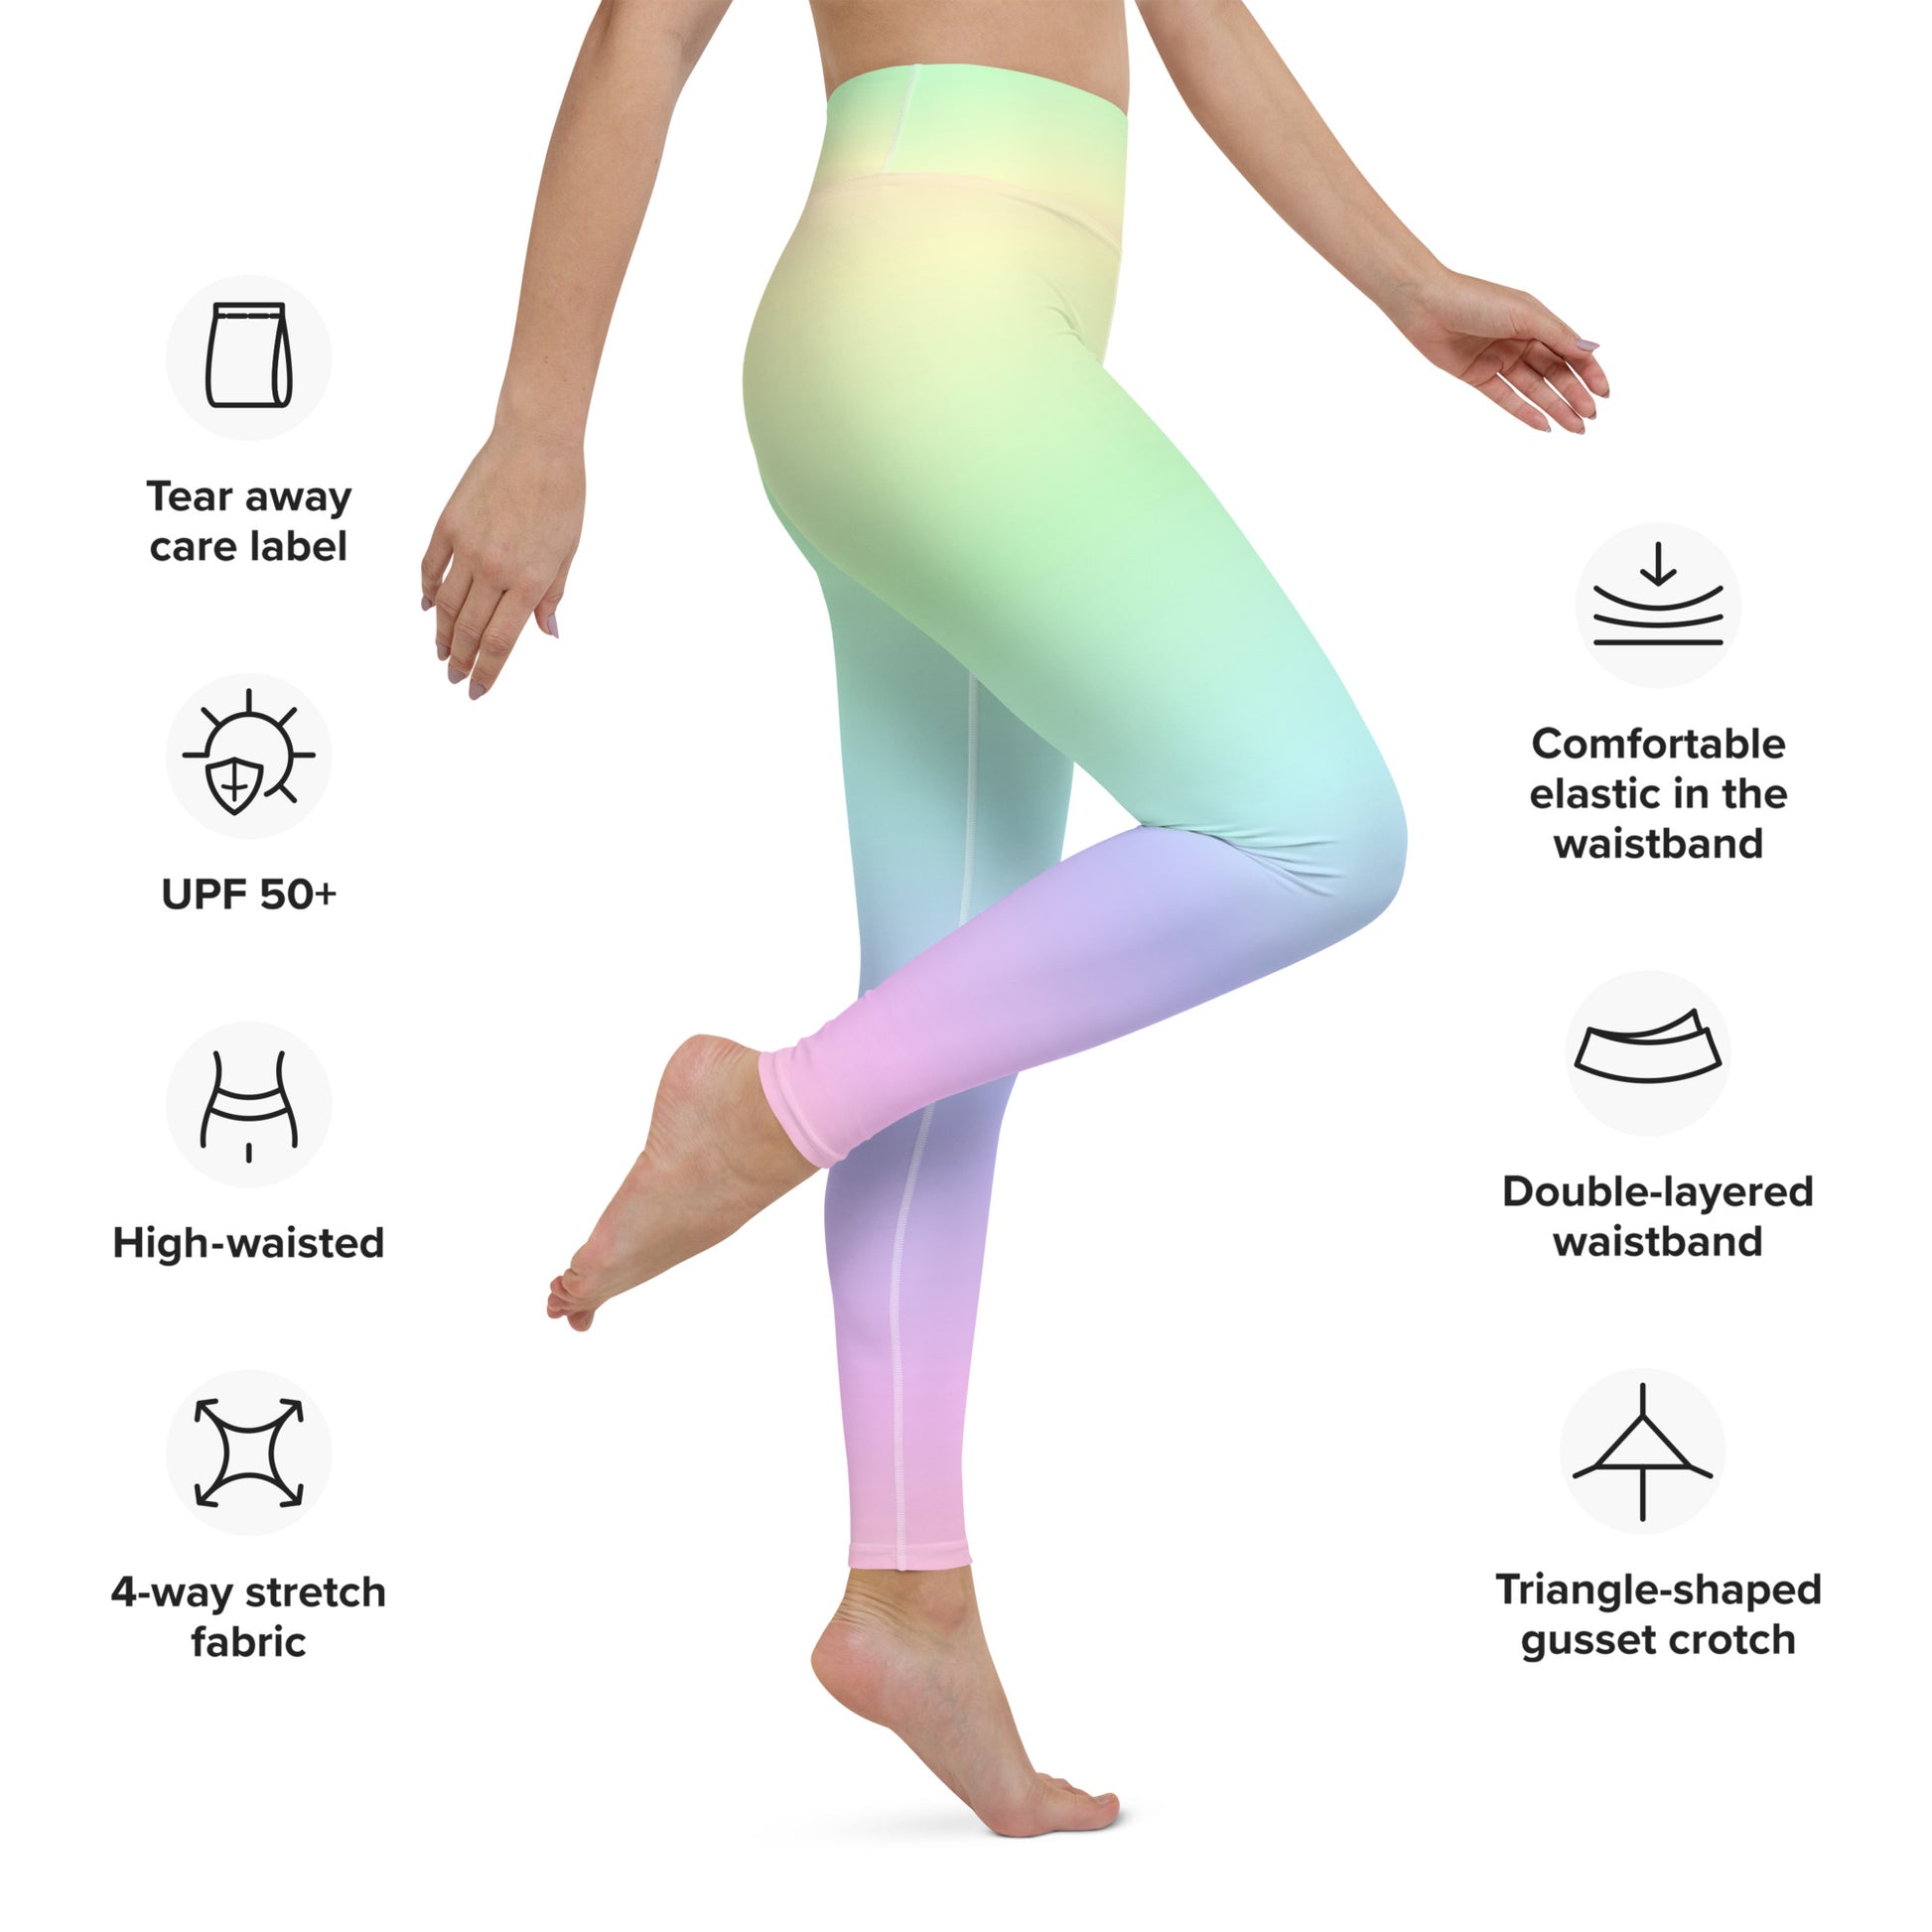 Women's Printed Compression Yoga Pants Active Workout Leggings Stretch  Tights 